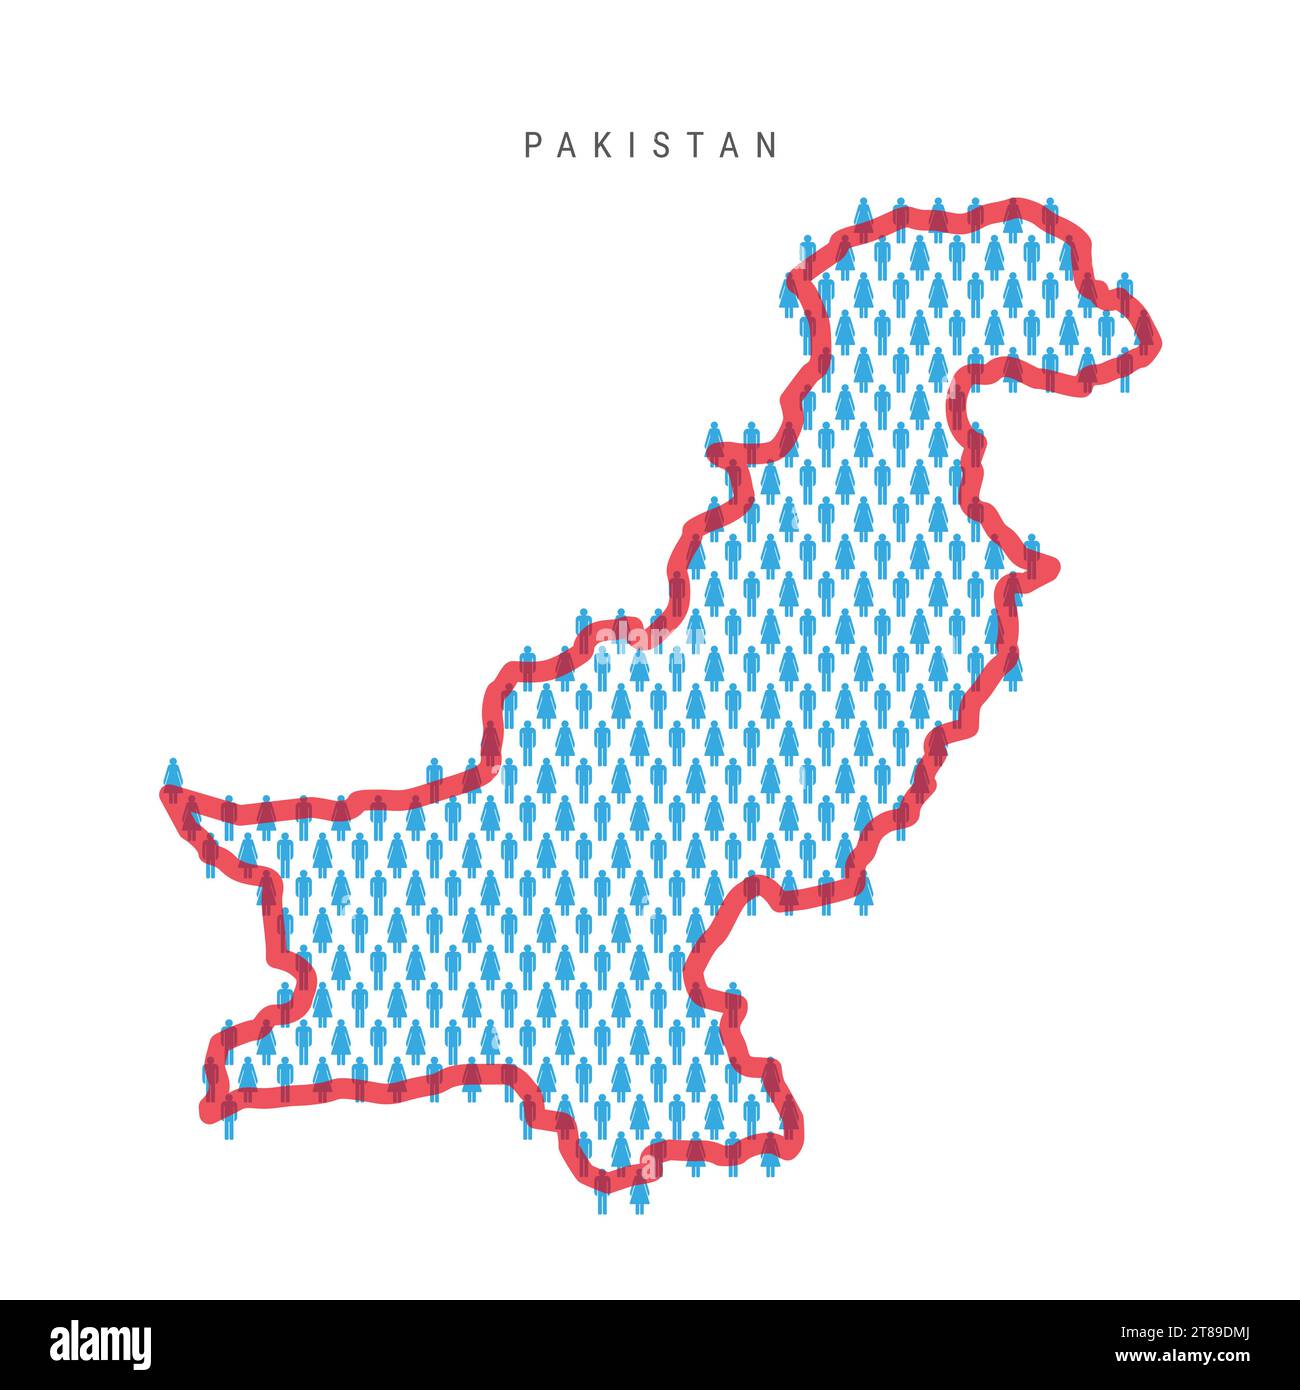 Pakistan population map. Stick figures Pakistani people map with bold red translucent country border. Pattern of men and women icons. Isolated vector Stock Vector